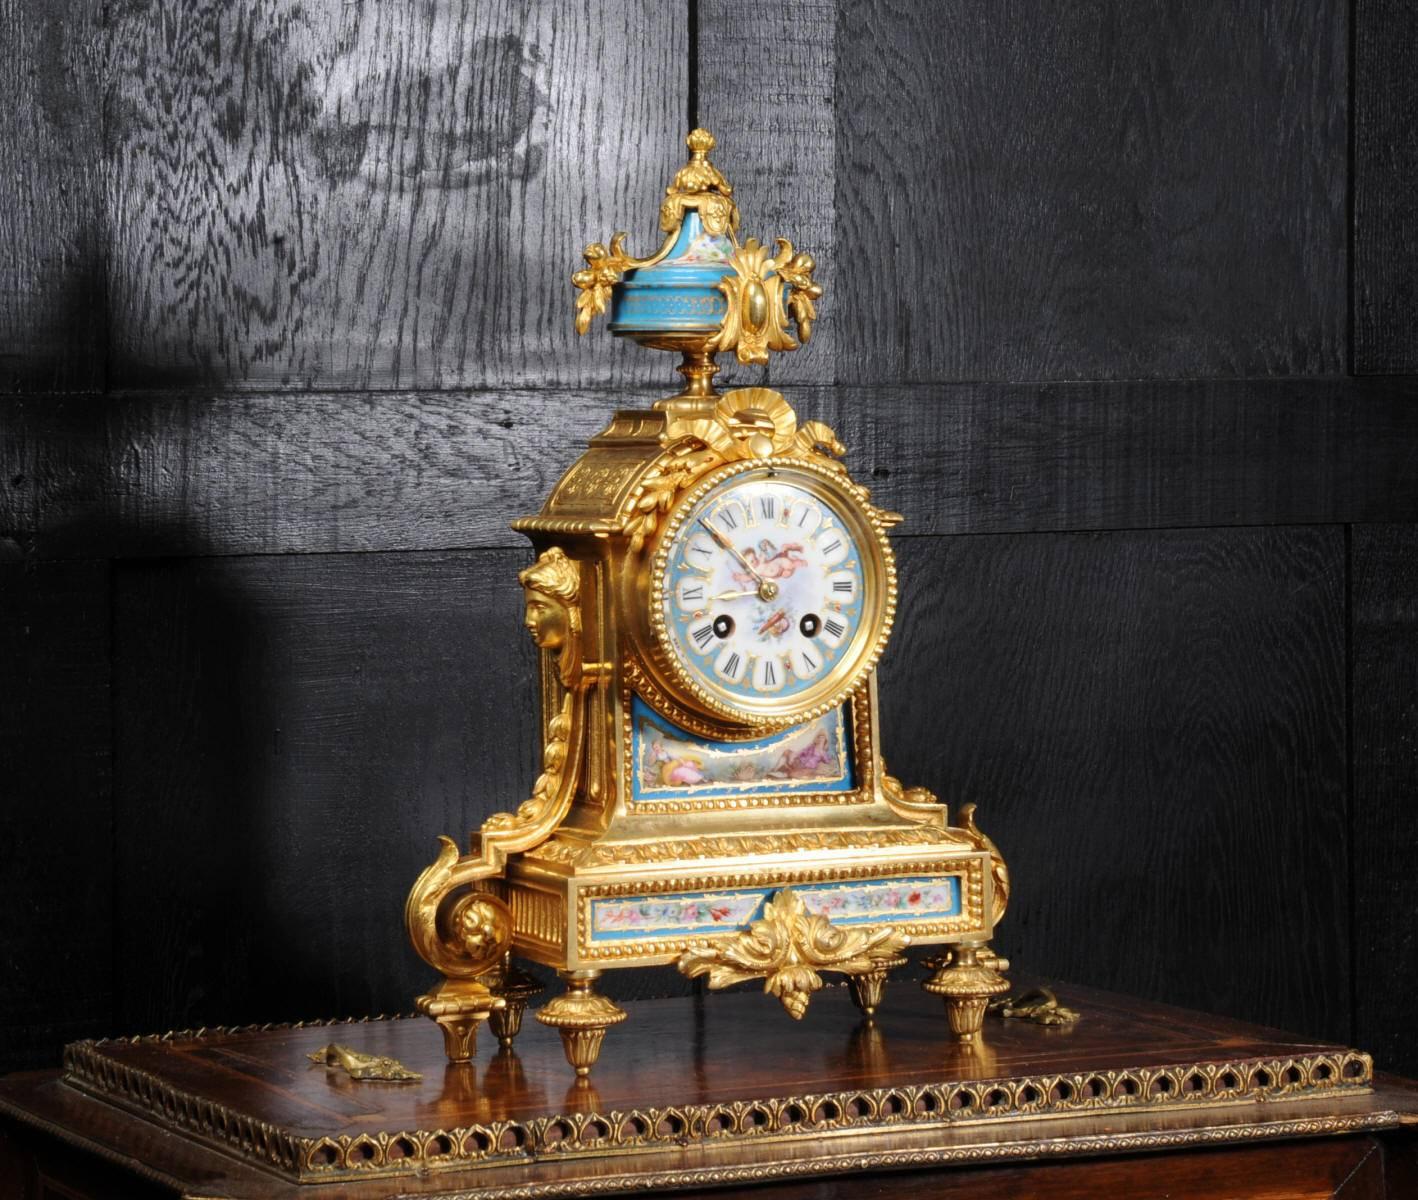 A stunning boudoir clock, fine original gilt bronze-mounted with lovely Sevres style porcelain, exquisitely decorated with a Bleu Celeste ground. it is a celebration of love, the dial features cupid about to launch an arrow above his quiver and